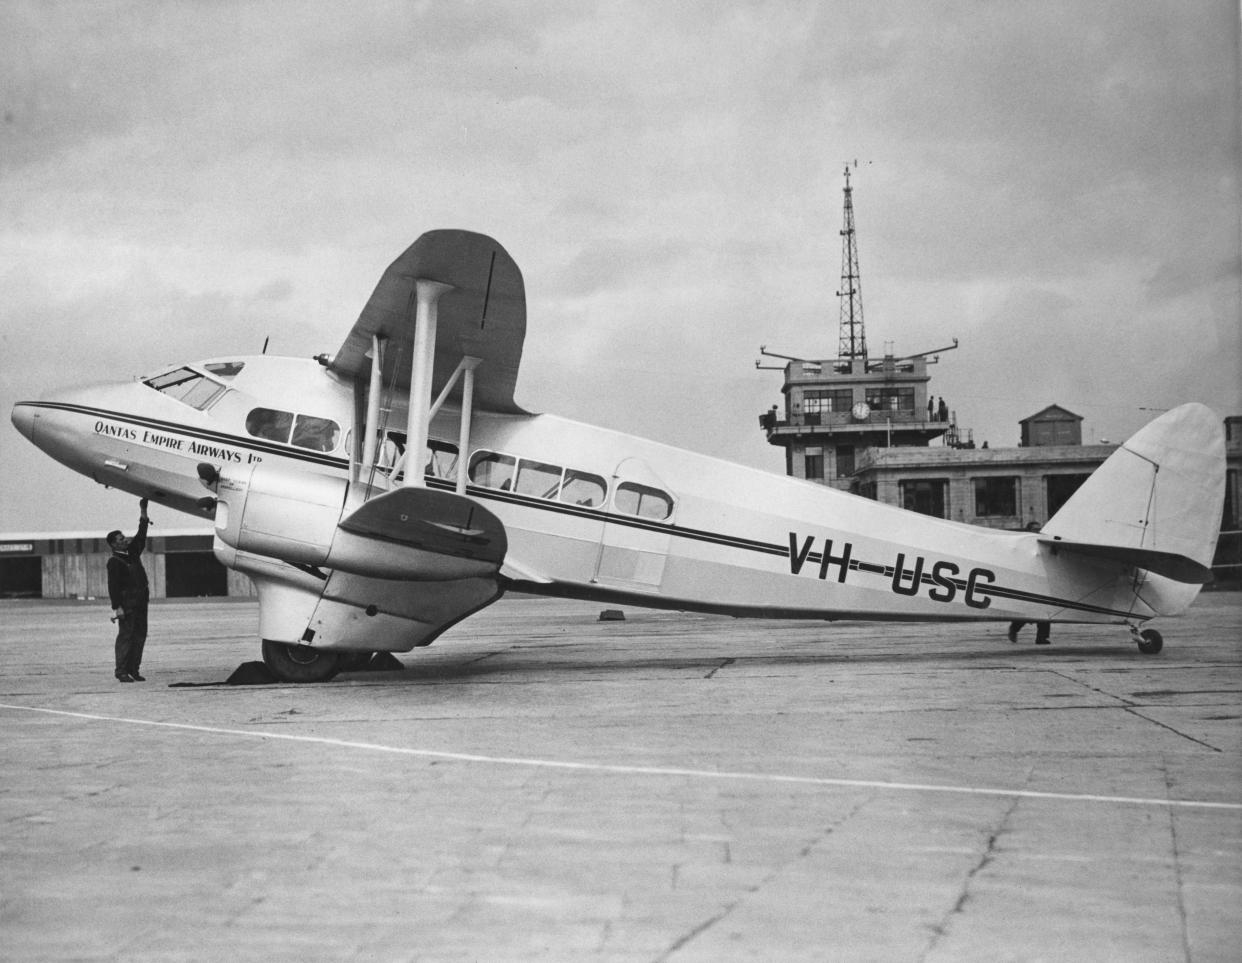 The De Havilland 86 - a little workhorse which could accommodate just 10 passengers - 2017 Getty Images